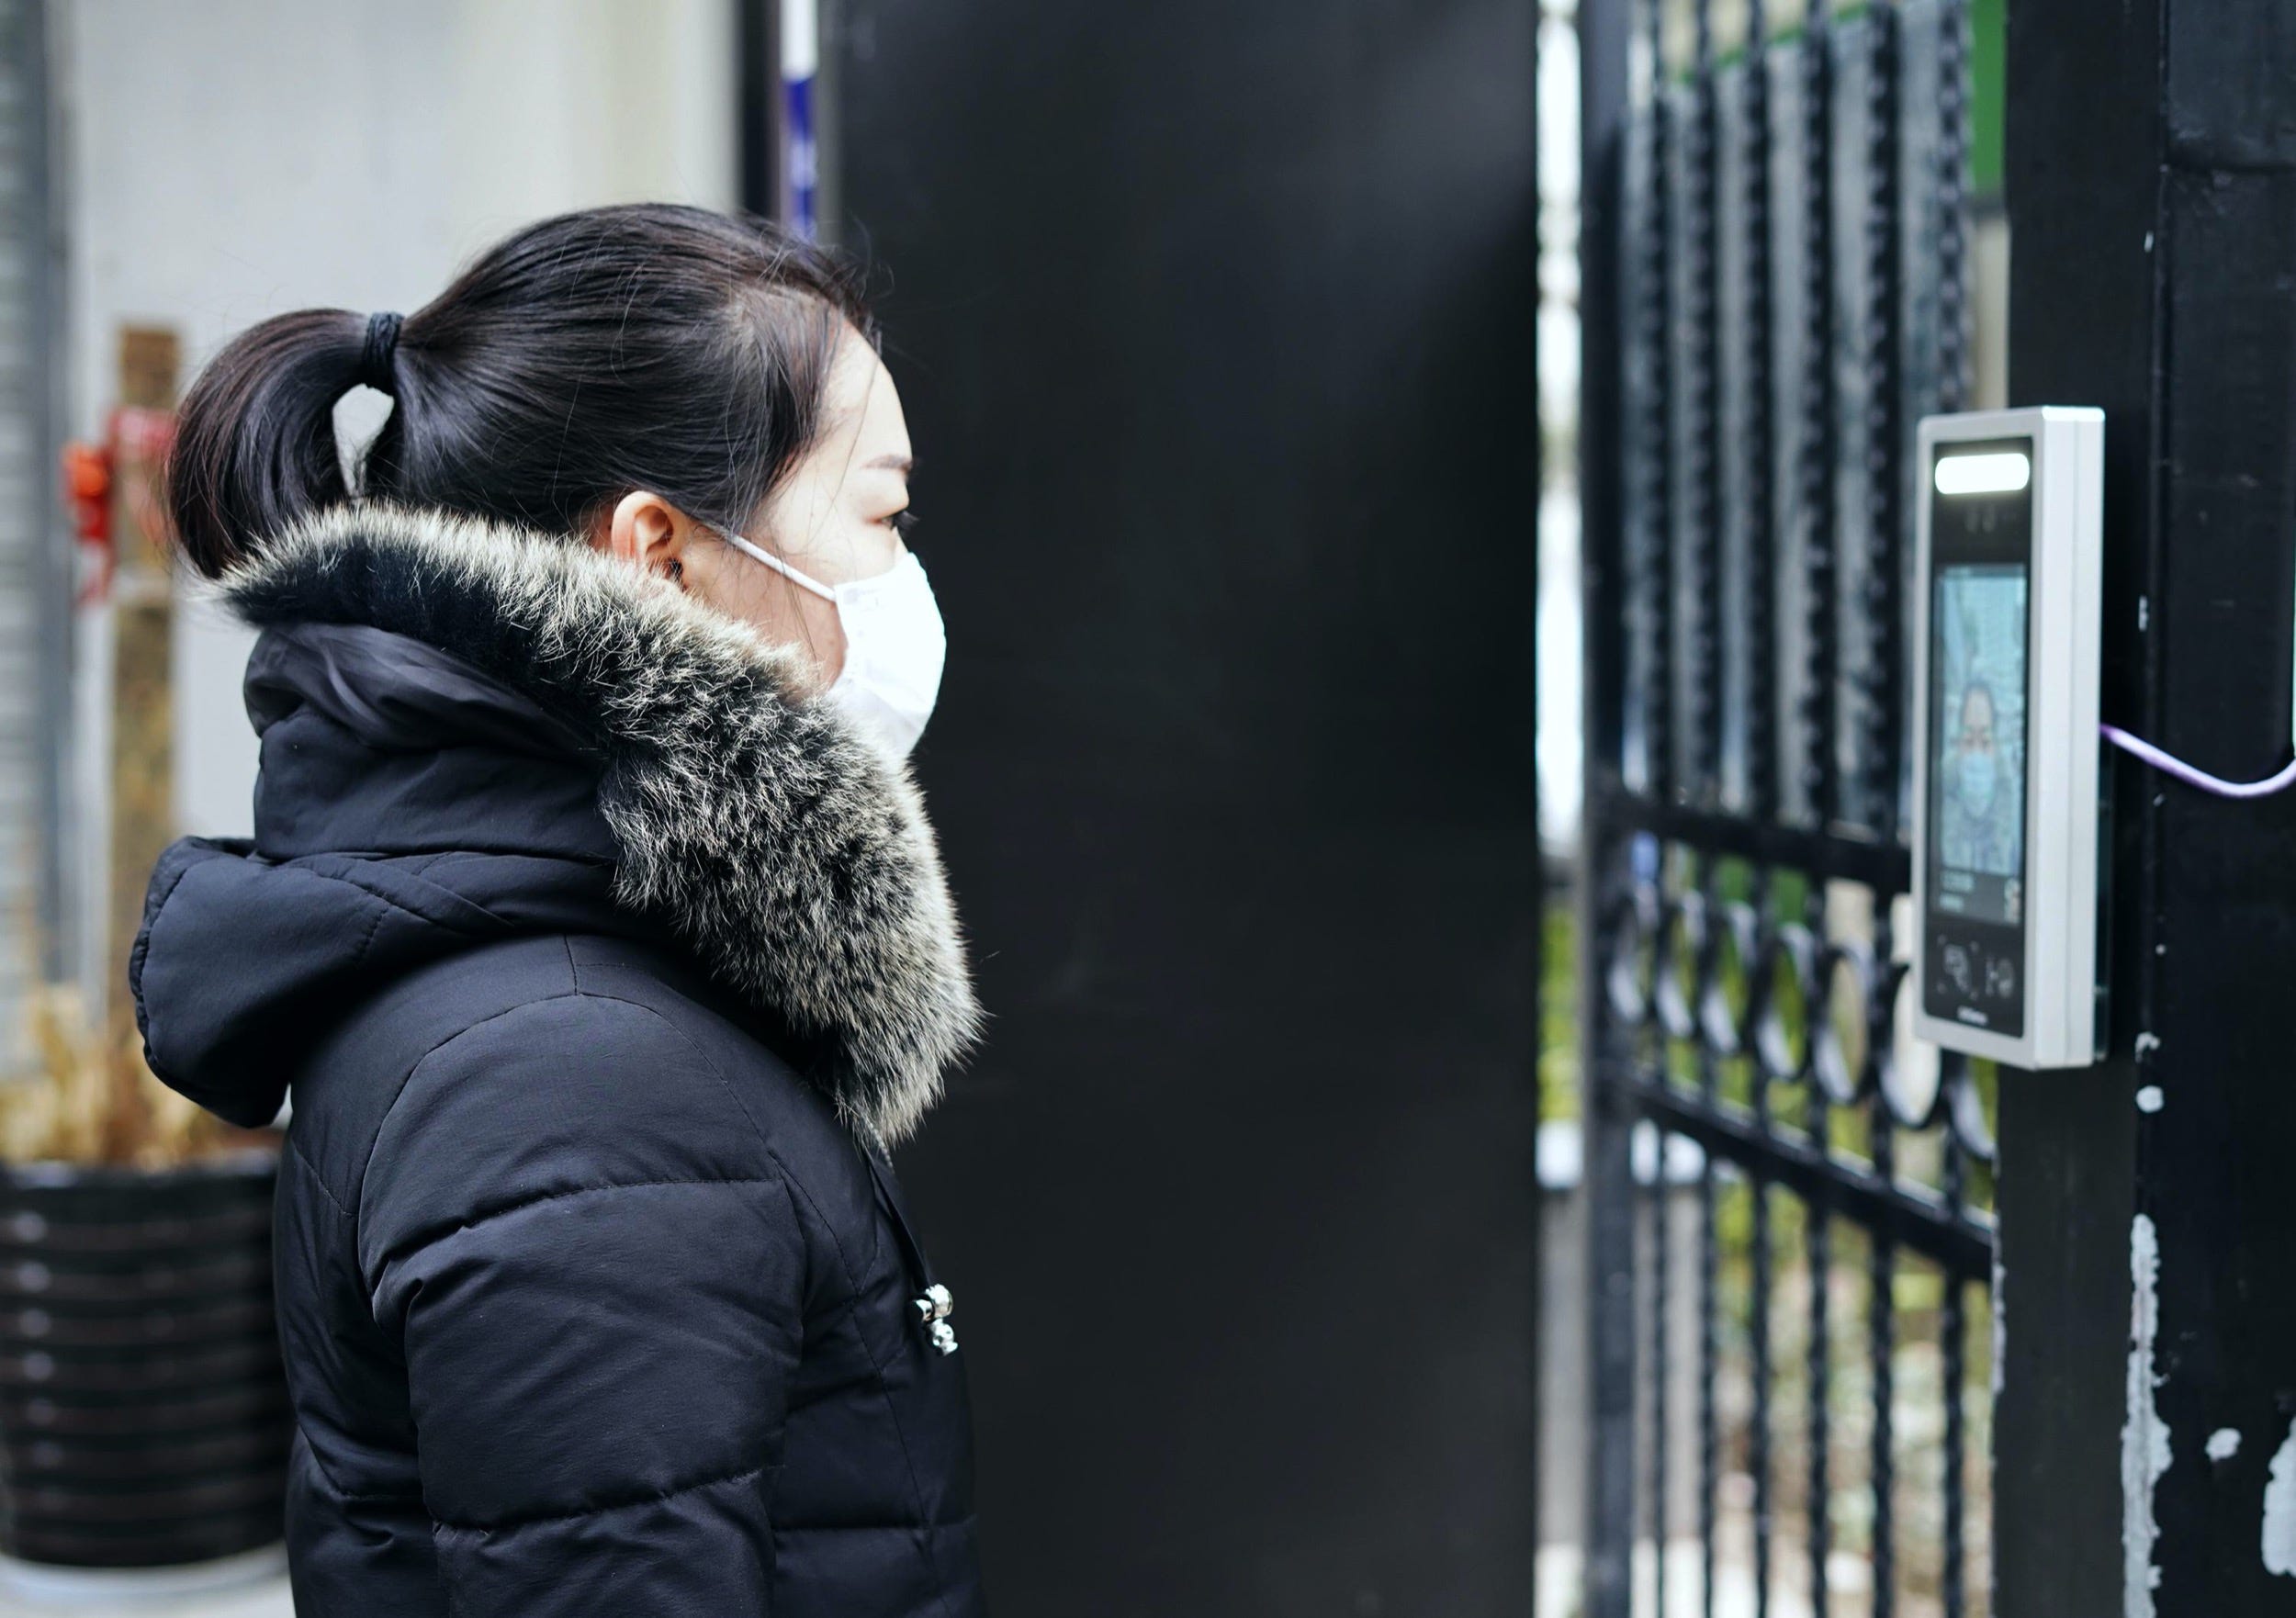 facial recognition gate  HANGZHOU, CHINA - MARCH 03: A woman wearing a face mask uses a face recognition system to enter a residence amid novel coronavirus outbreak on March 3, 2020 in Hangzhou, Zhejiang Province of China. (Photo By Cai Zixin/China News Service via Getty Images)